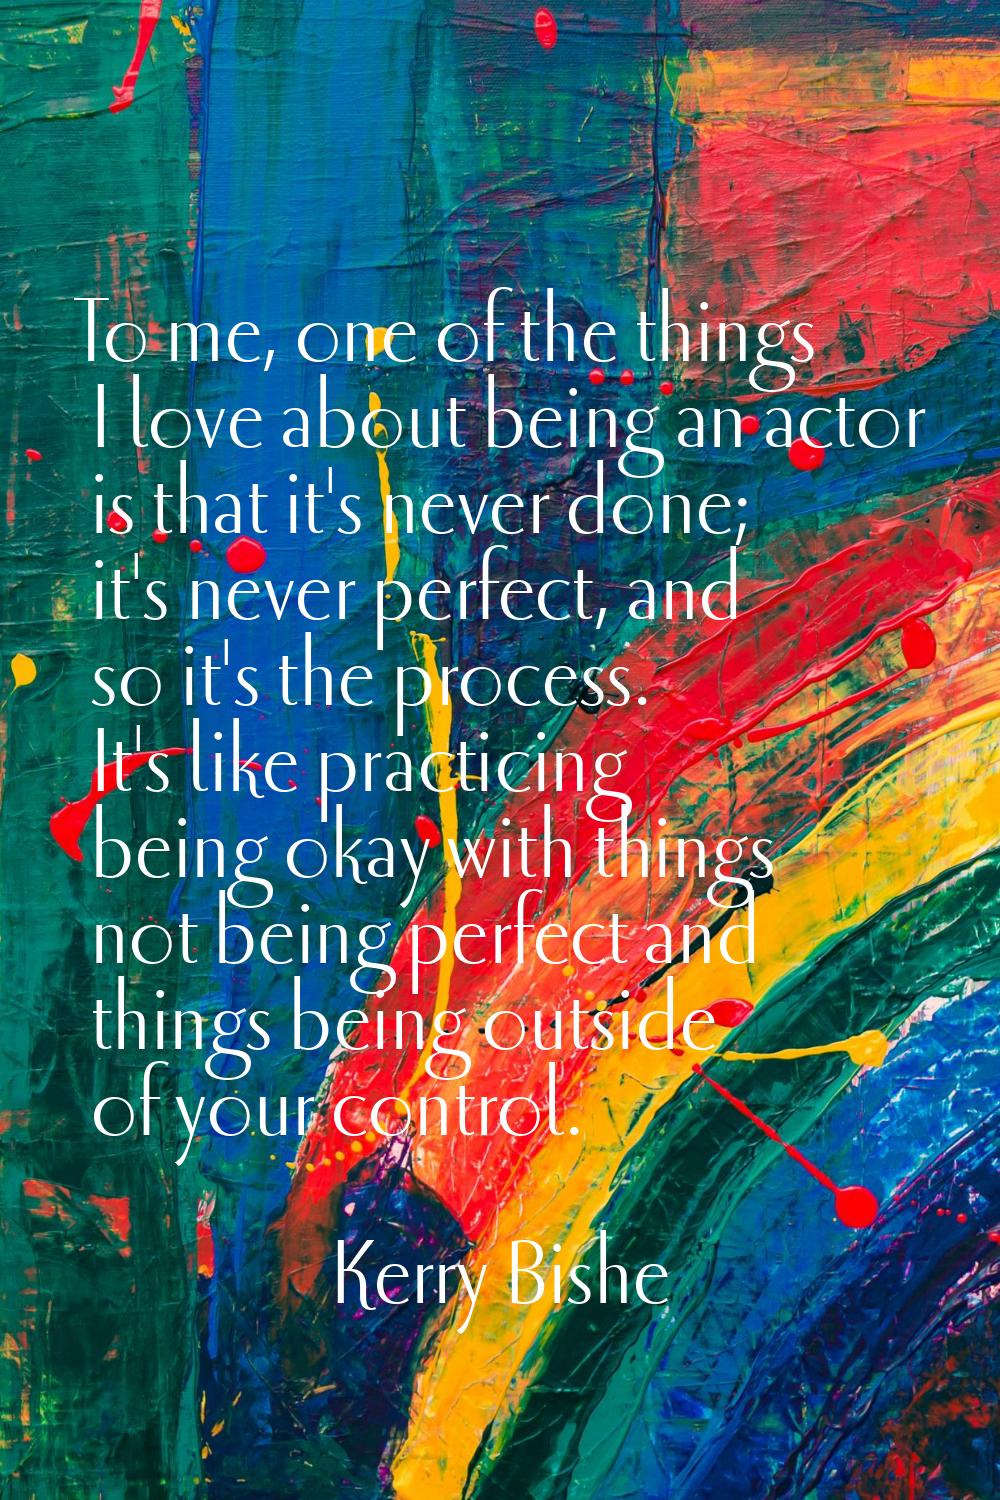 To me, one of the things I love about being an actor is that it's never done; it's never perfect, a